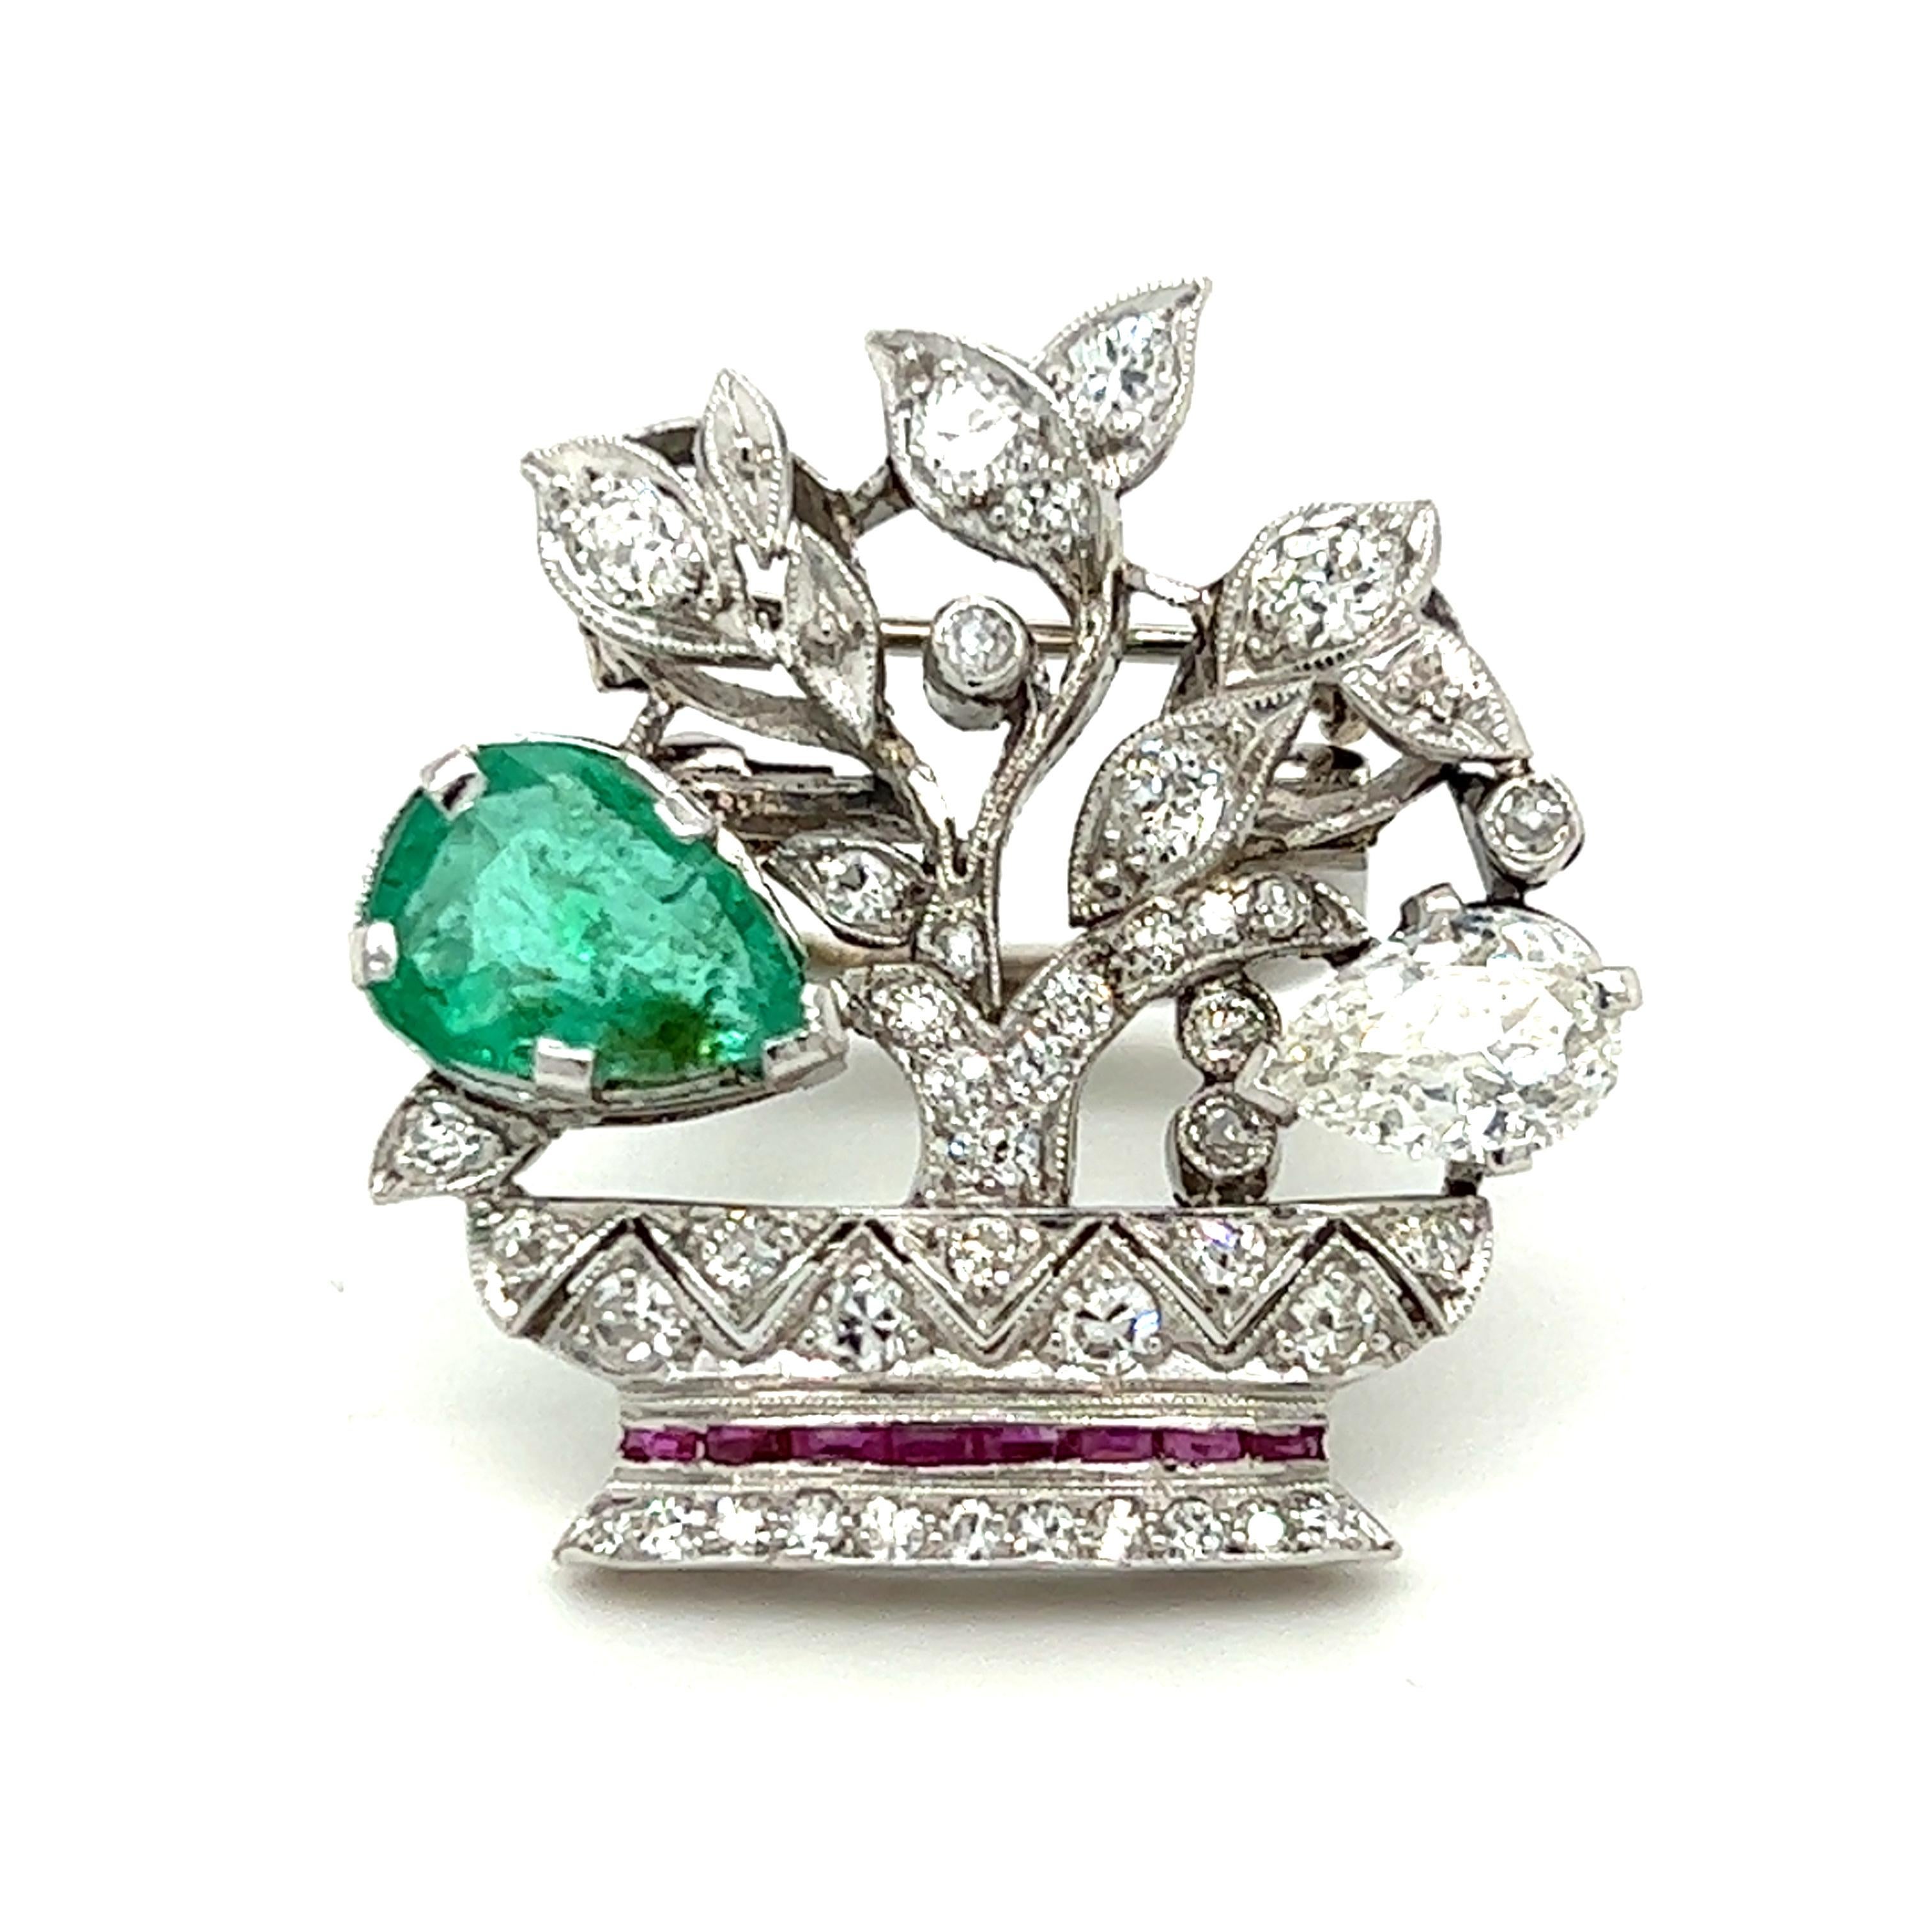 One platinum Art Deco clip brooch in a plant design set wit one (1) 9x7mm pear shaped emerald, one (1) 2x5.5mm pear shaped diamond with K/L color and I1 clarity, forty-one (41) small old mine cut diamonds, approximately 1.00 carat total weight with